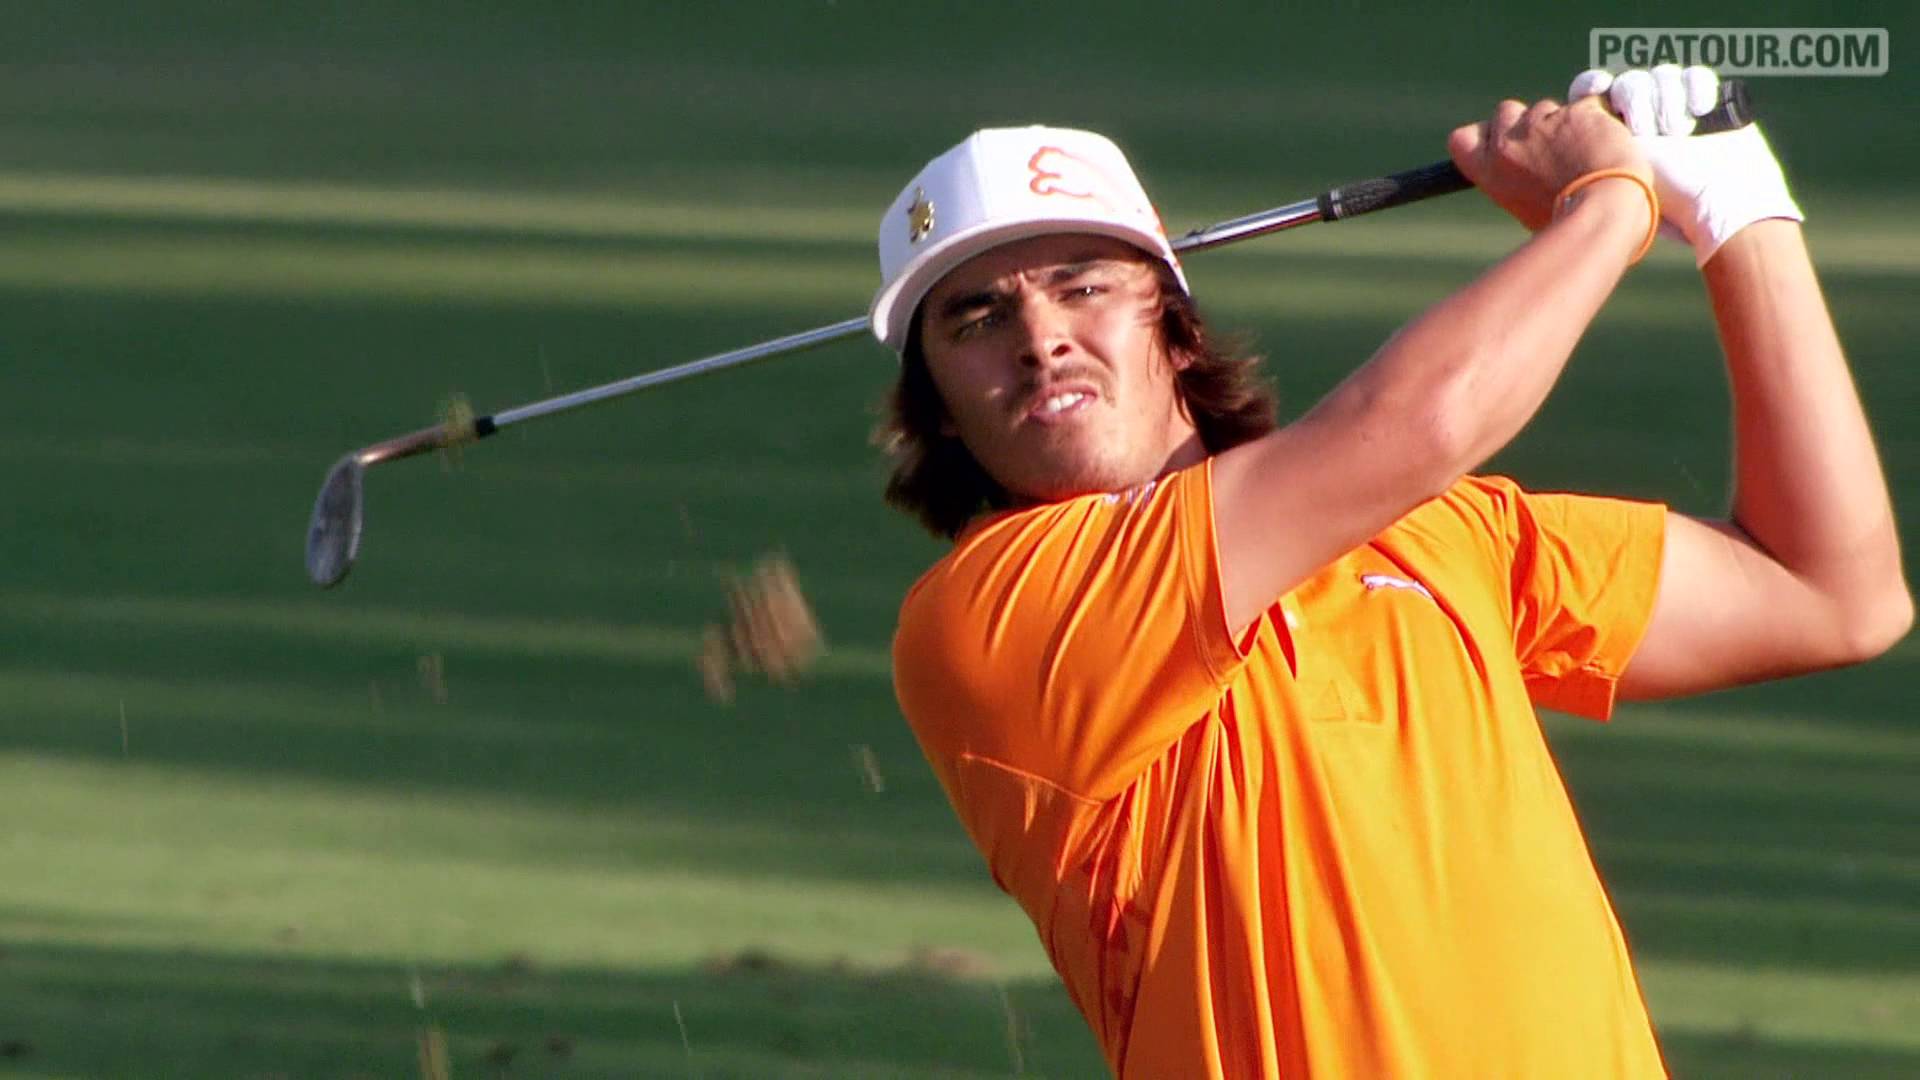 2012 Shots of the Year: No. 9 -- Rickie Fowler - YouTube